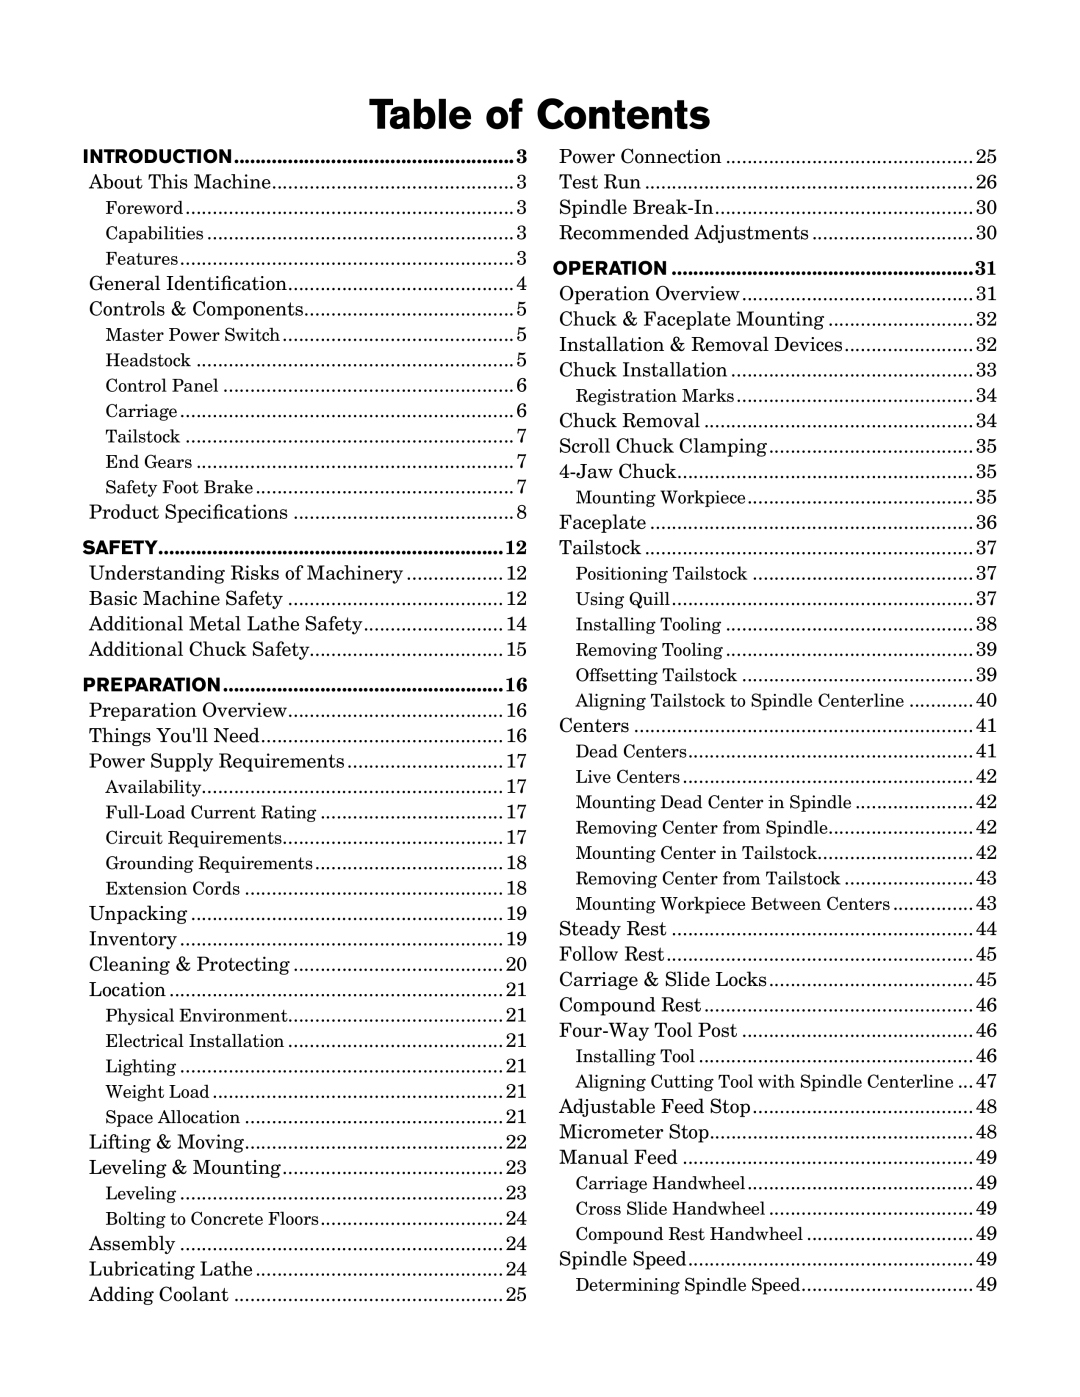 Southbend SB owner manual Table of Contents, Introduction, Safety, Preparation, Operation 